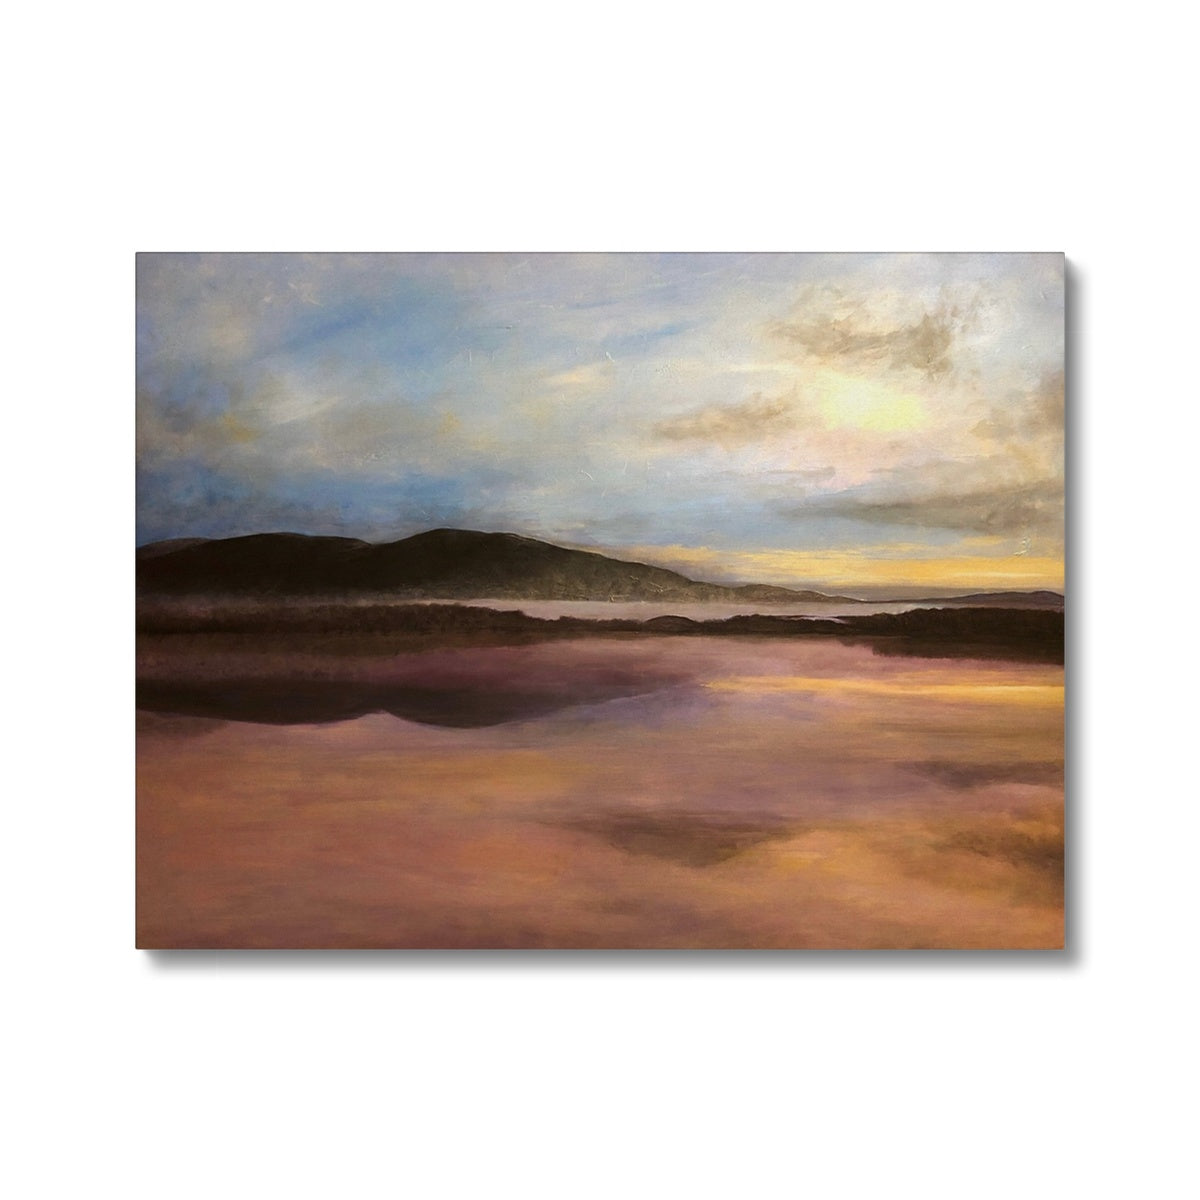 Loch Garten Painting | Canvas From Scotland-Contemporary Stretched Canvas Prints-Scottish Lochs & Mountains Art Gallery-24"x18"-Paintings, Prints, Homeware, Art Gifts From Scotland By Scottish Artist Kevin Hunter